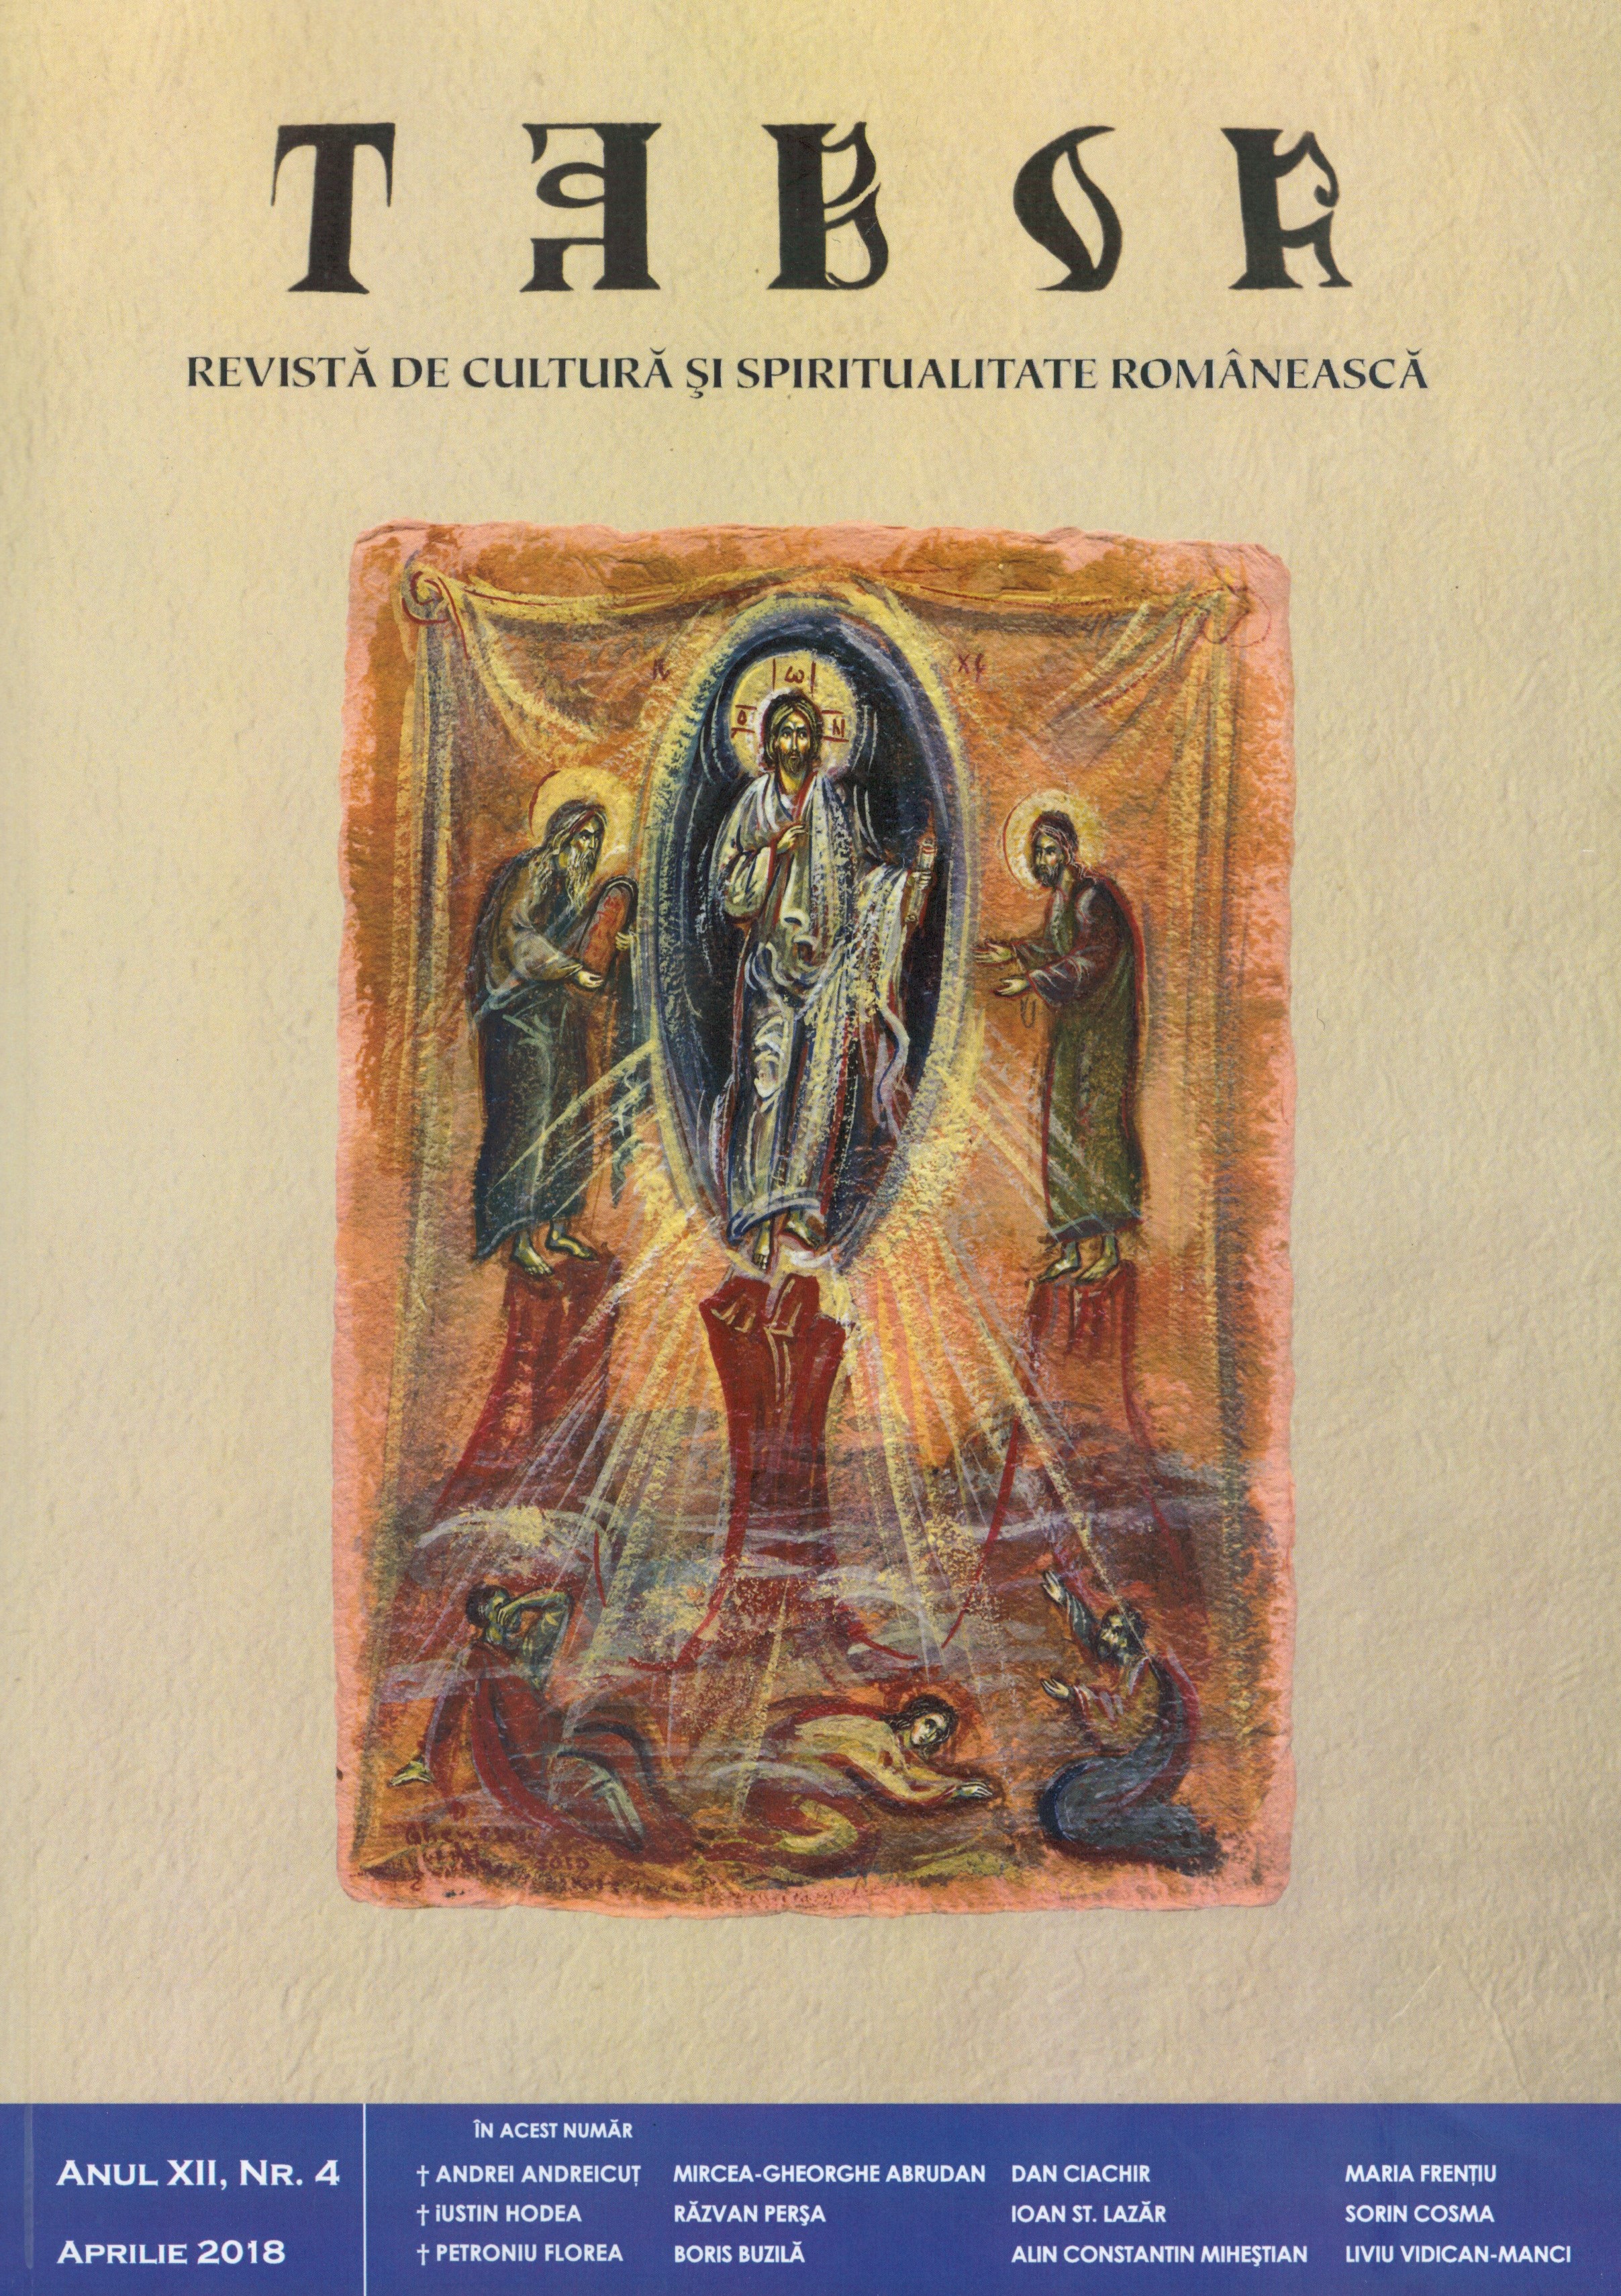 170 years since Saint Andrei Şaguna was ordained bishop (April 18 1848). Historical and canonical analysis of documents